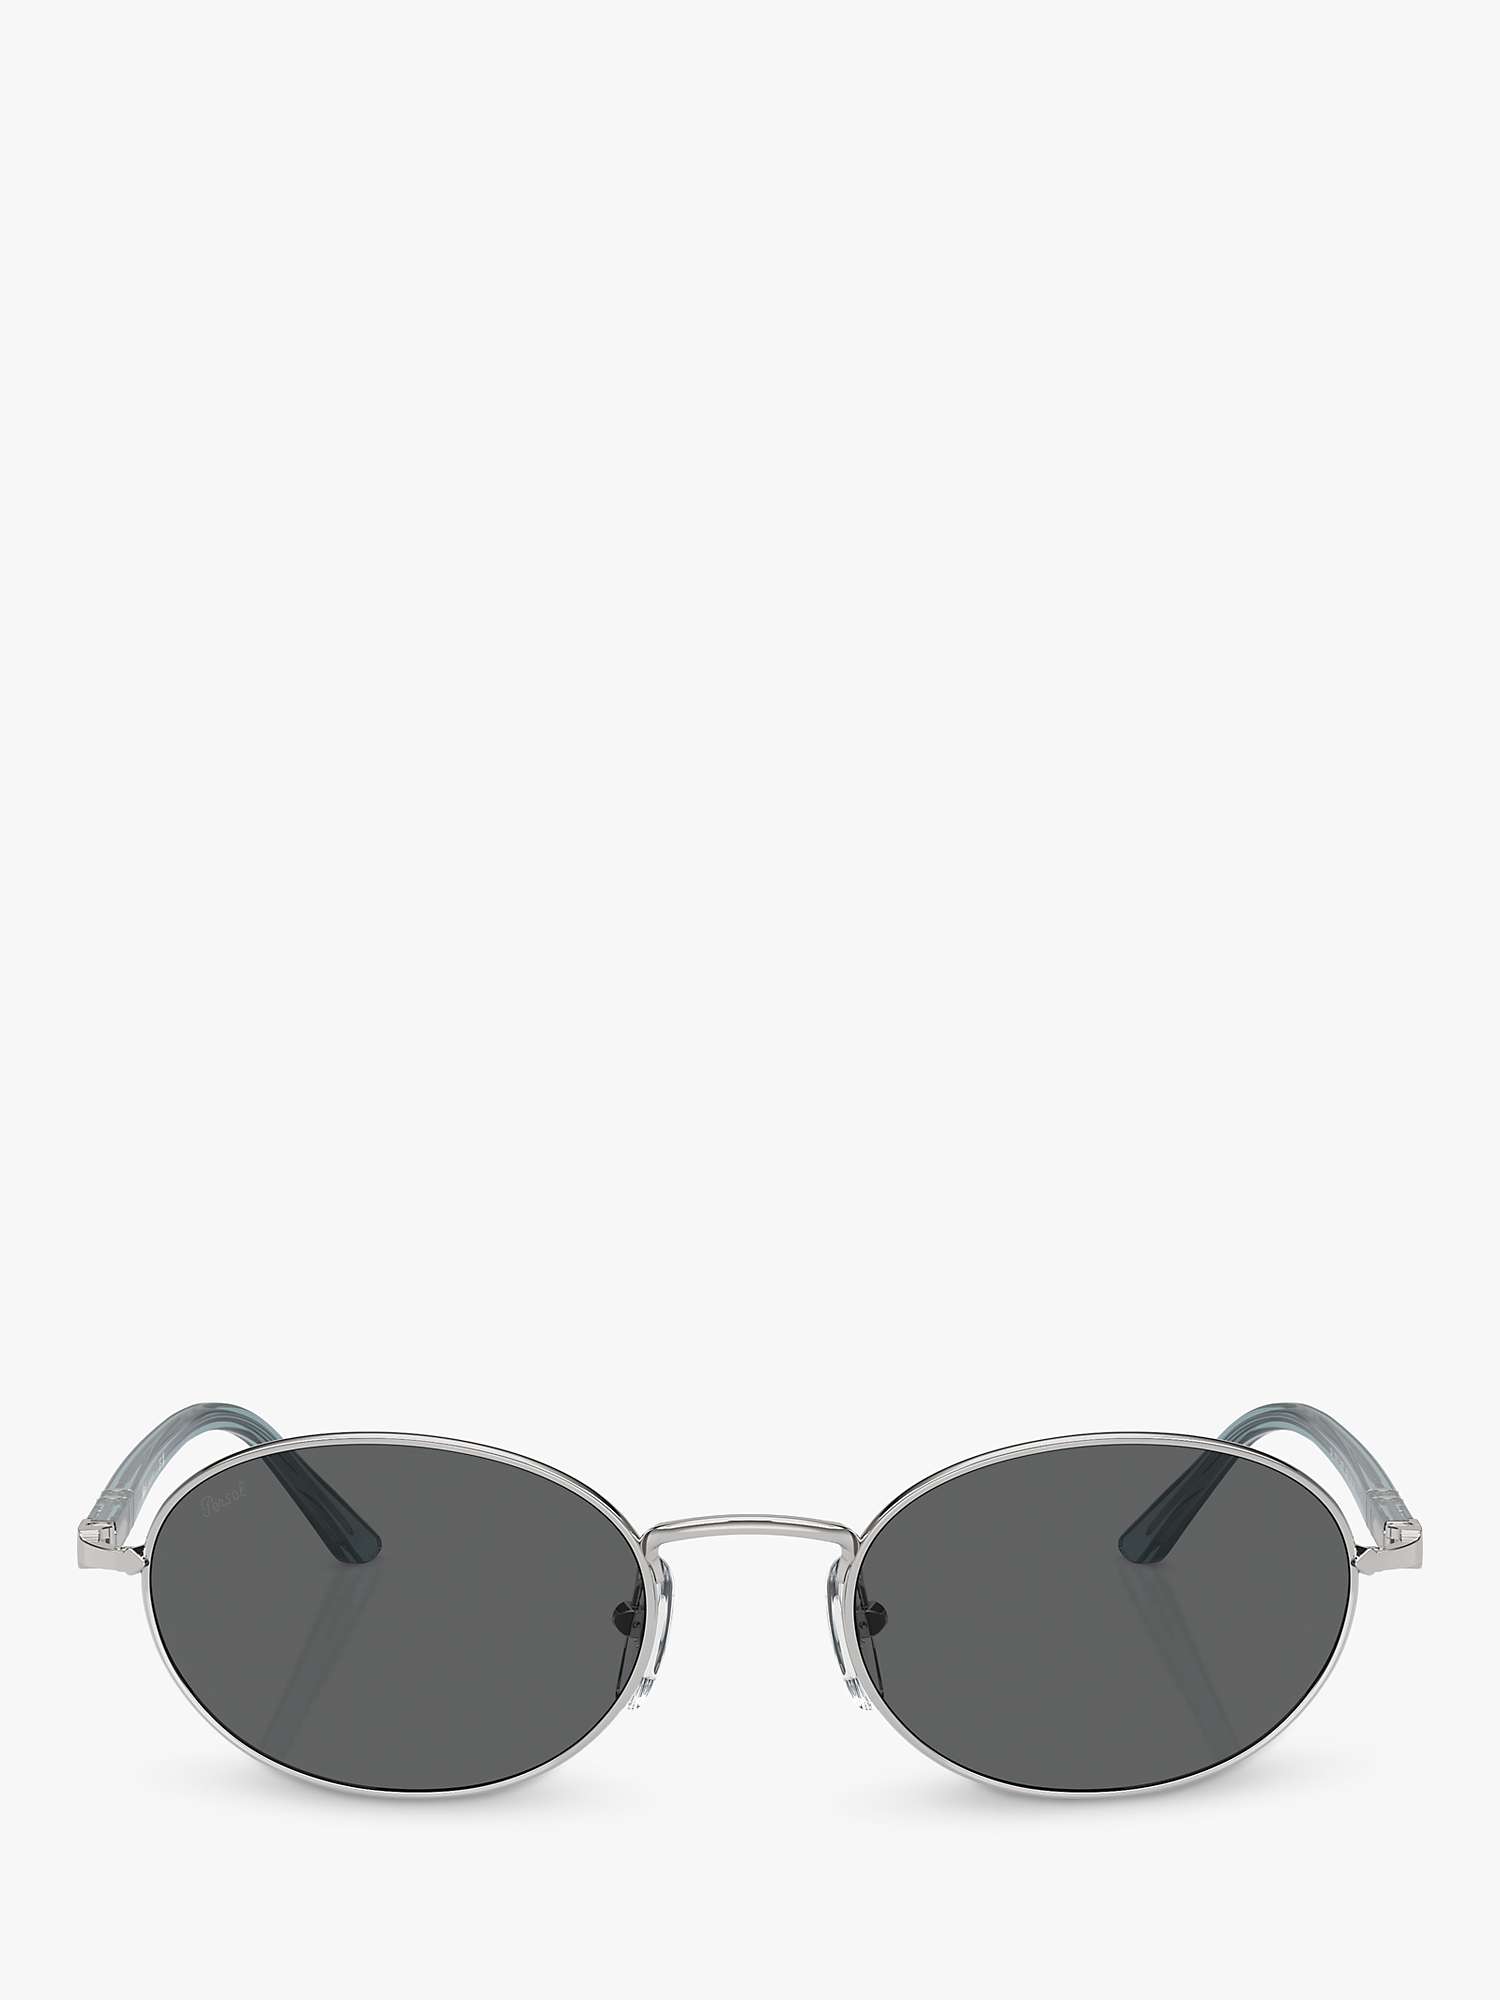 Buy Persol PO1018S Unisex Ida Oval Sunglasses, Silver/Grey Online at johnlewis.com